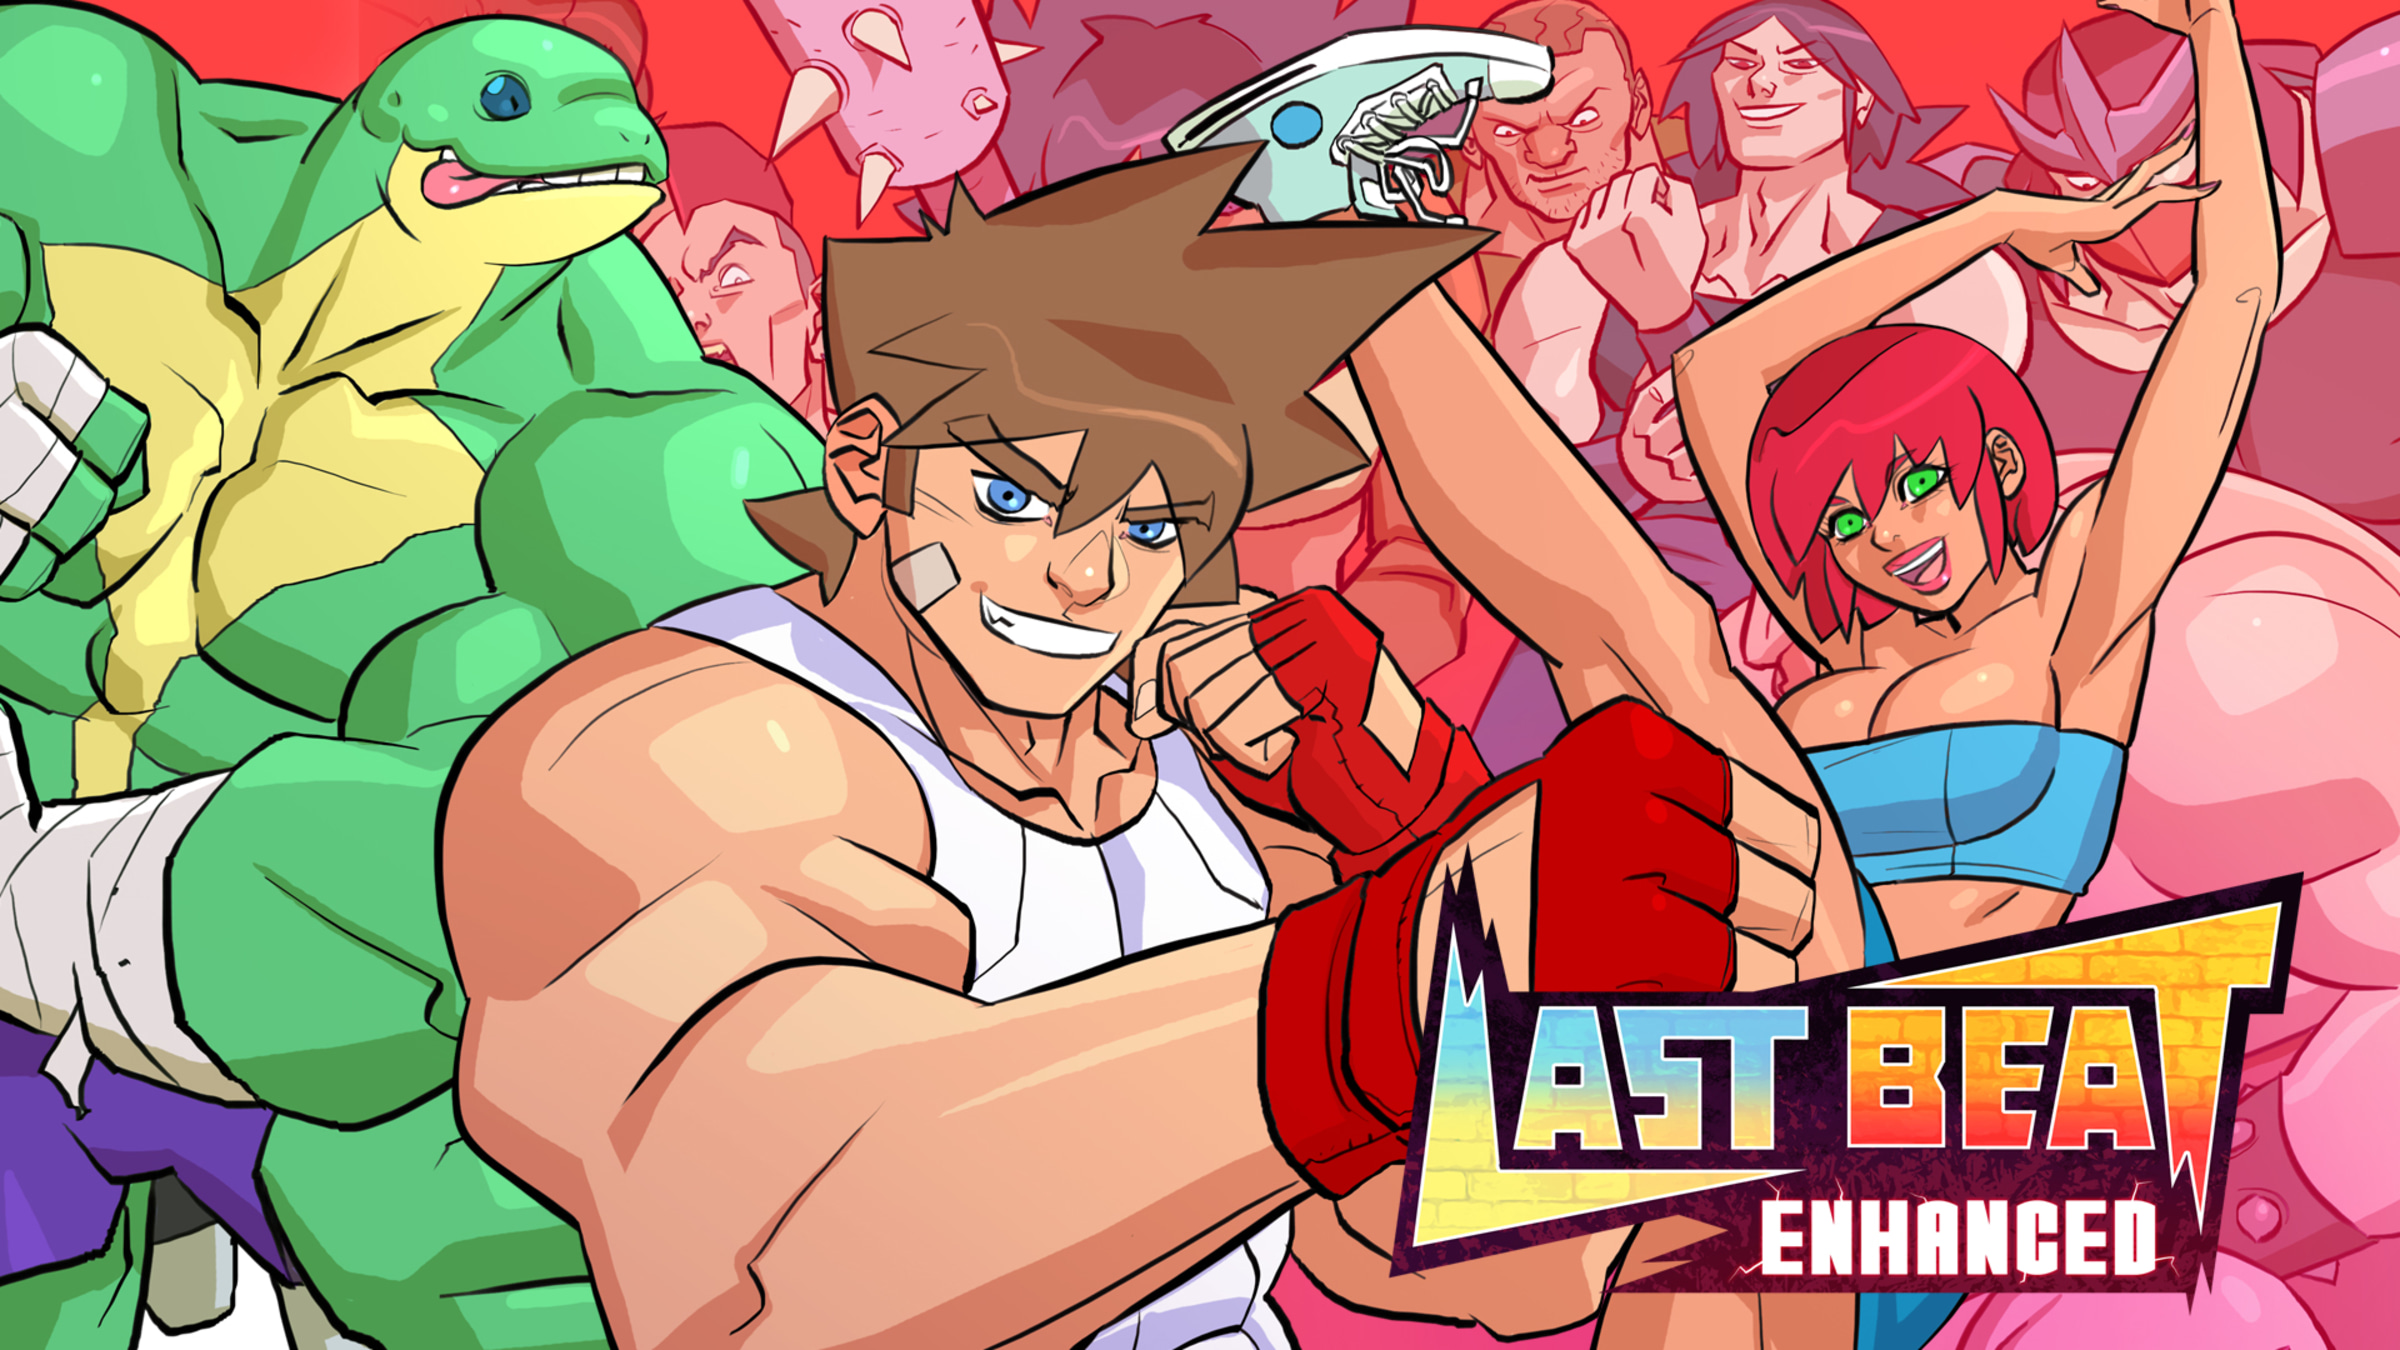 Last Beat Enhanced for Nintendo Switch - Nintendo Official Site